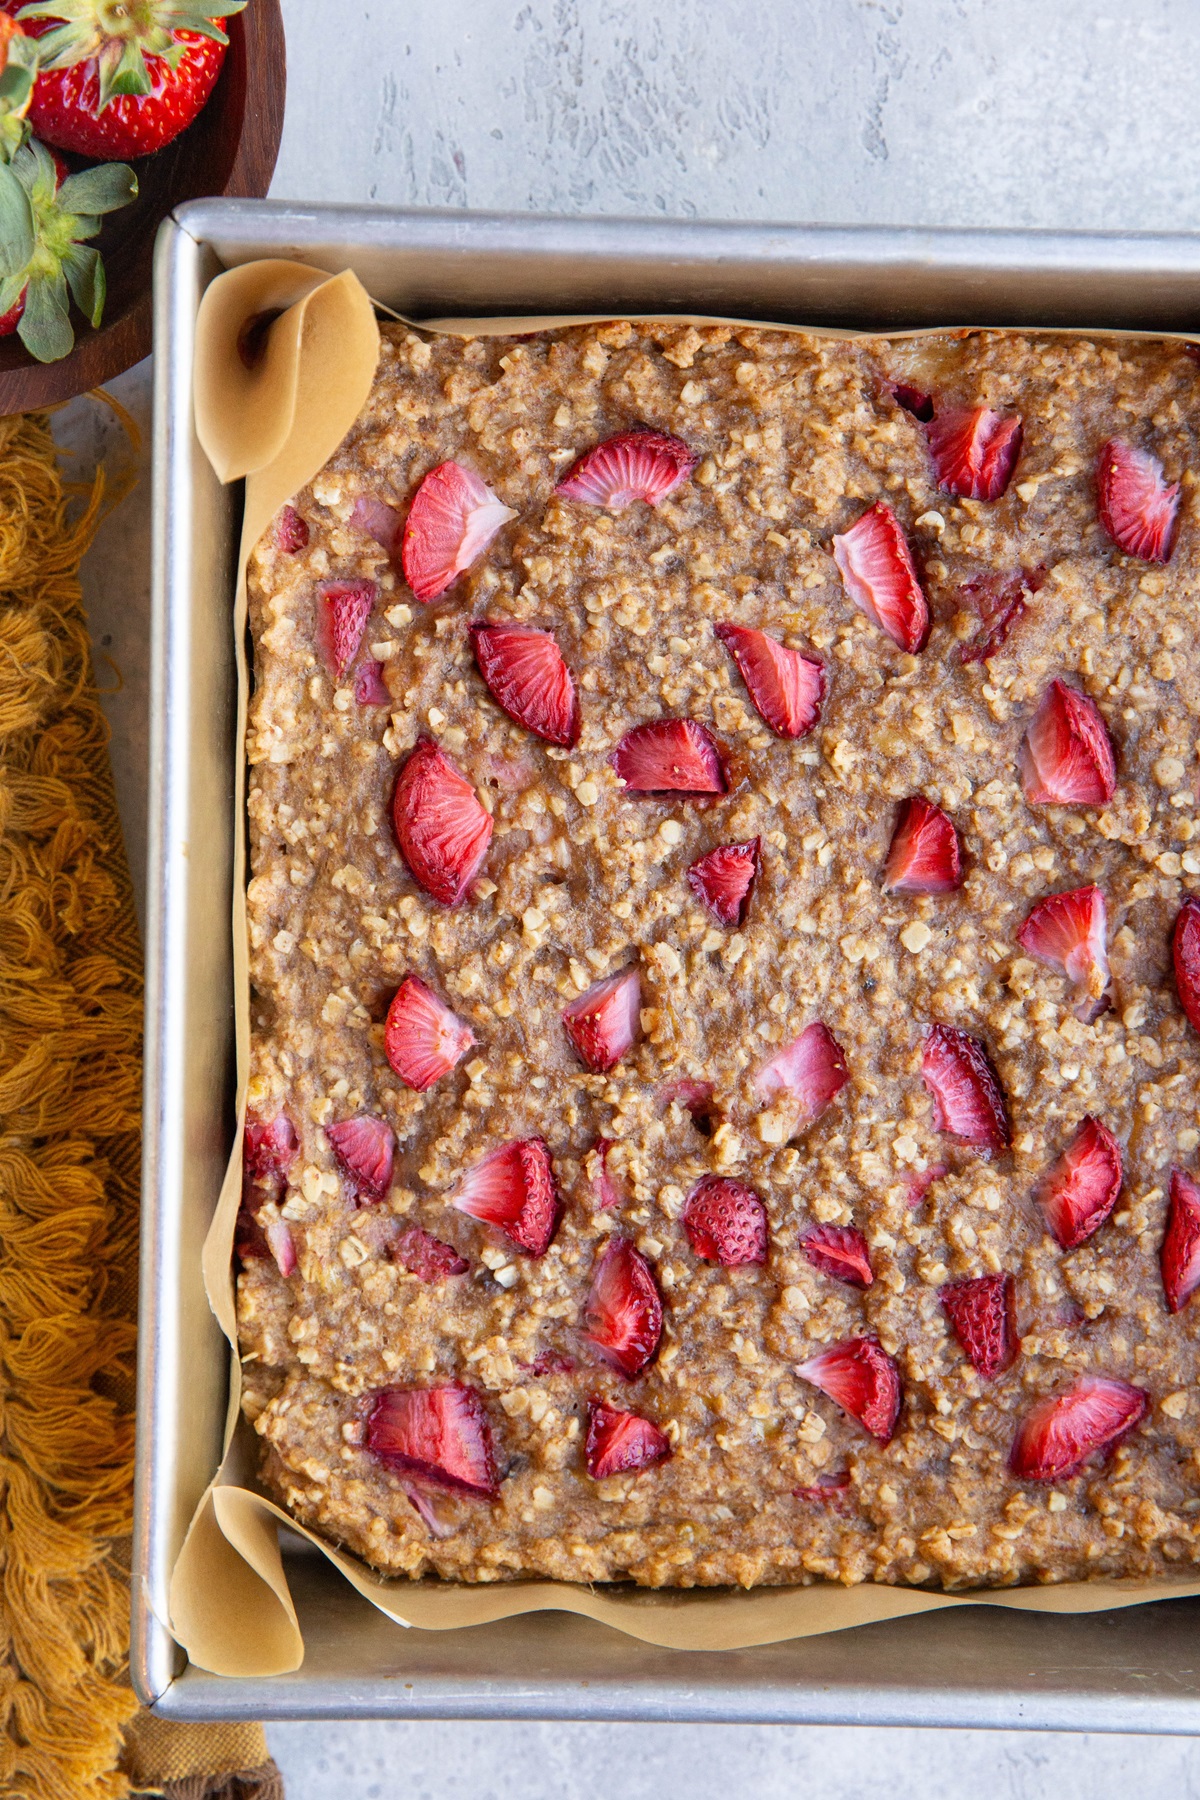 Strawberry breakfast bars, fresh out of the oven with a golden napkin and a bowl of fresh strawberries to the side.